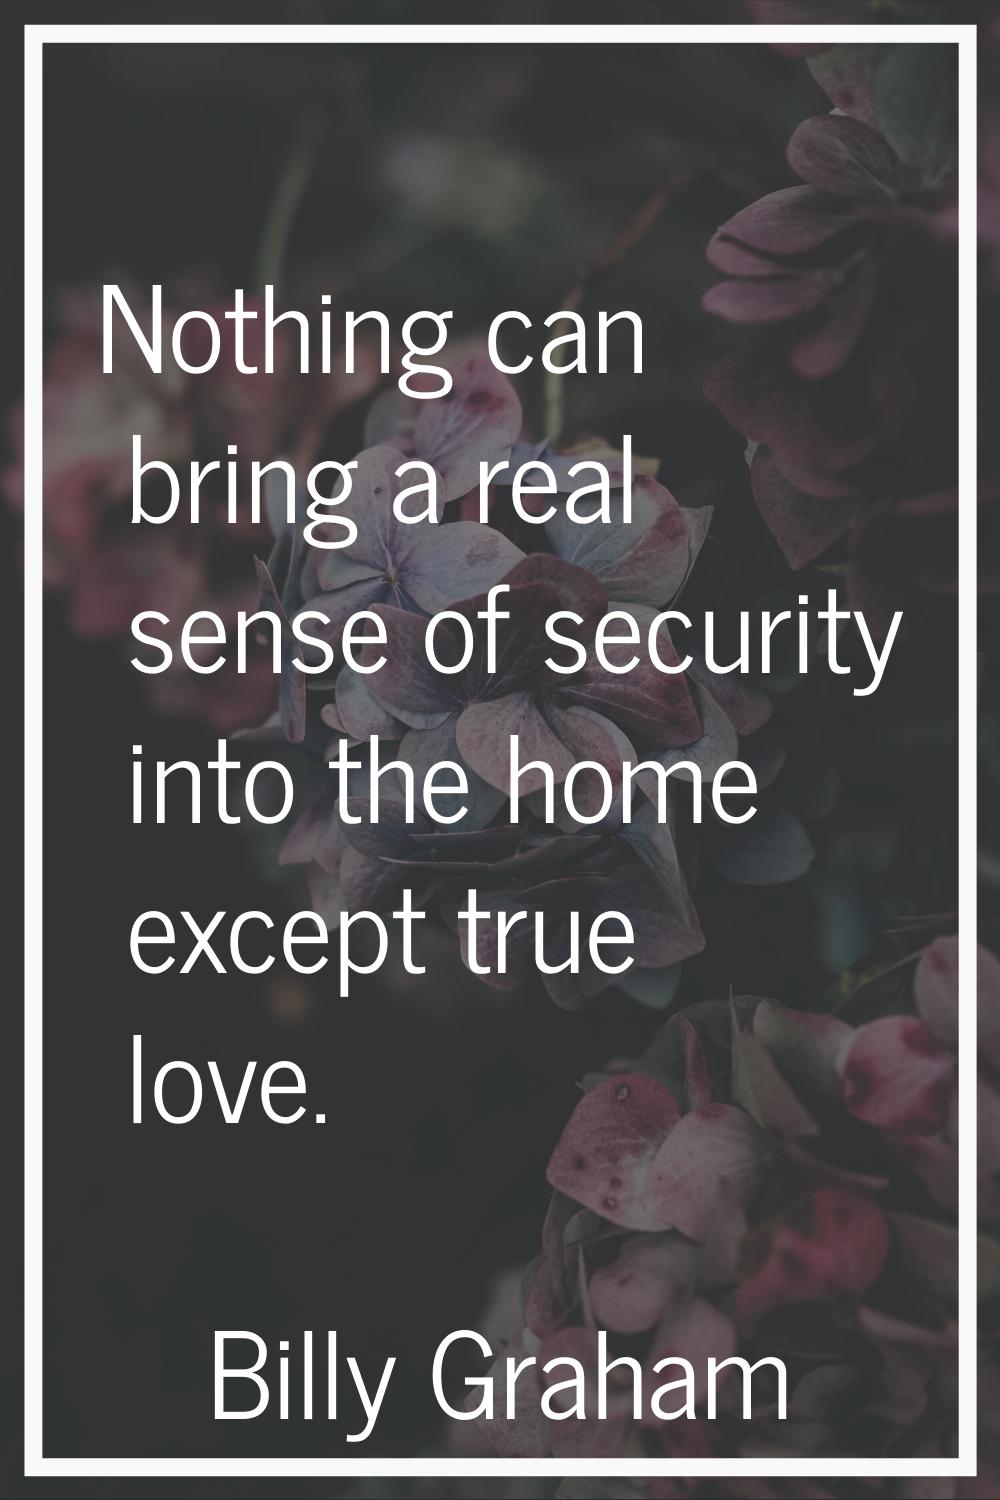 Nothing can bring a real sense of security into the home except true love.